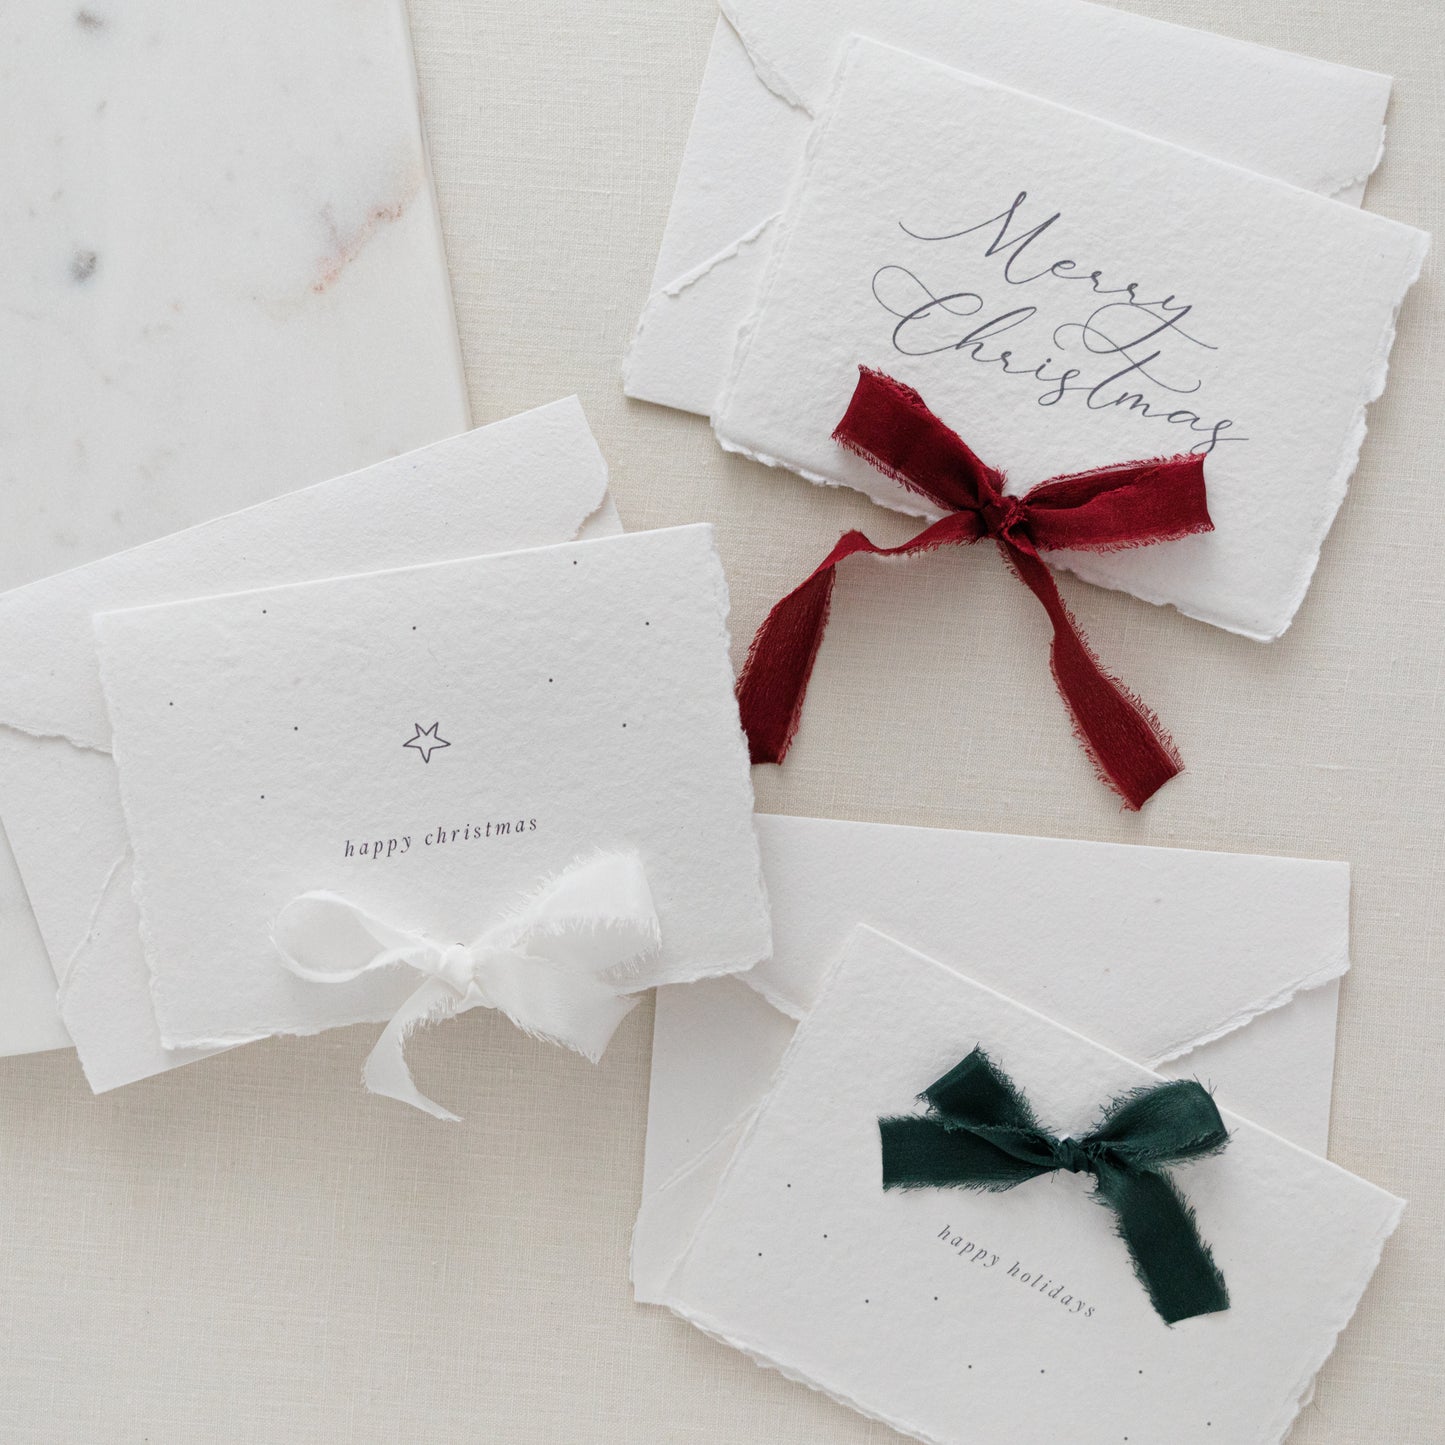 Christmas Cards with Handmade Paper Envelopes – Set of 5